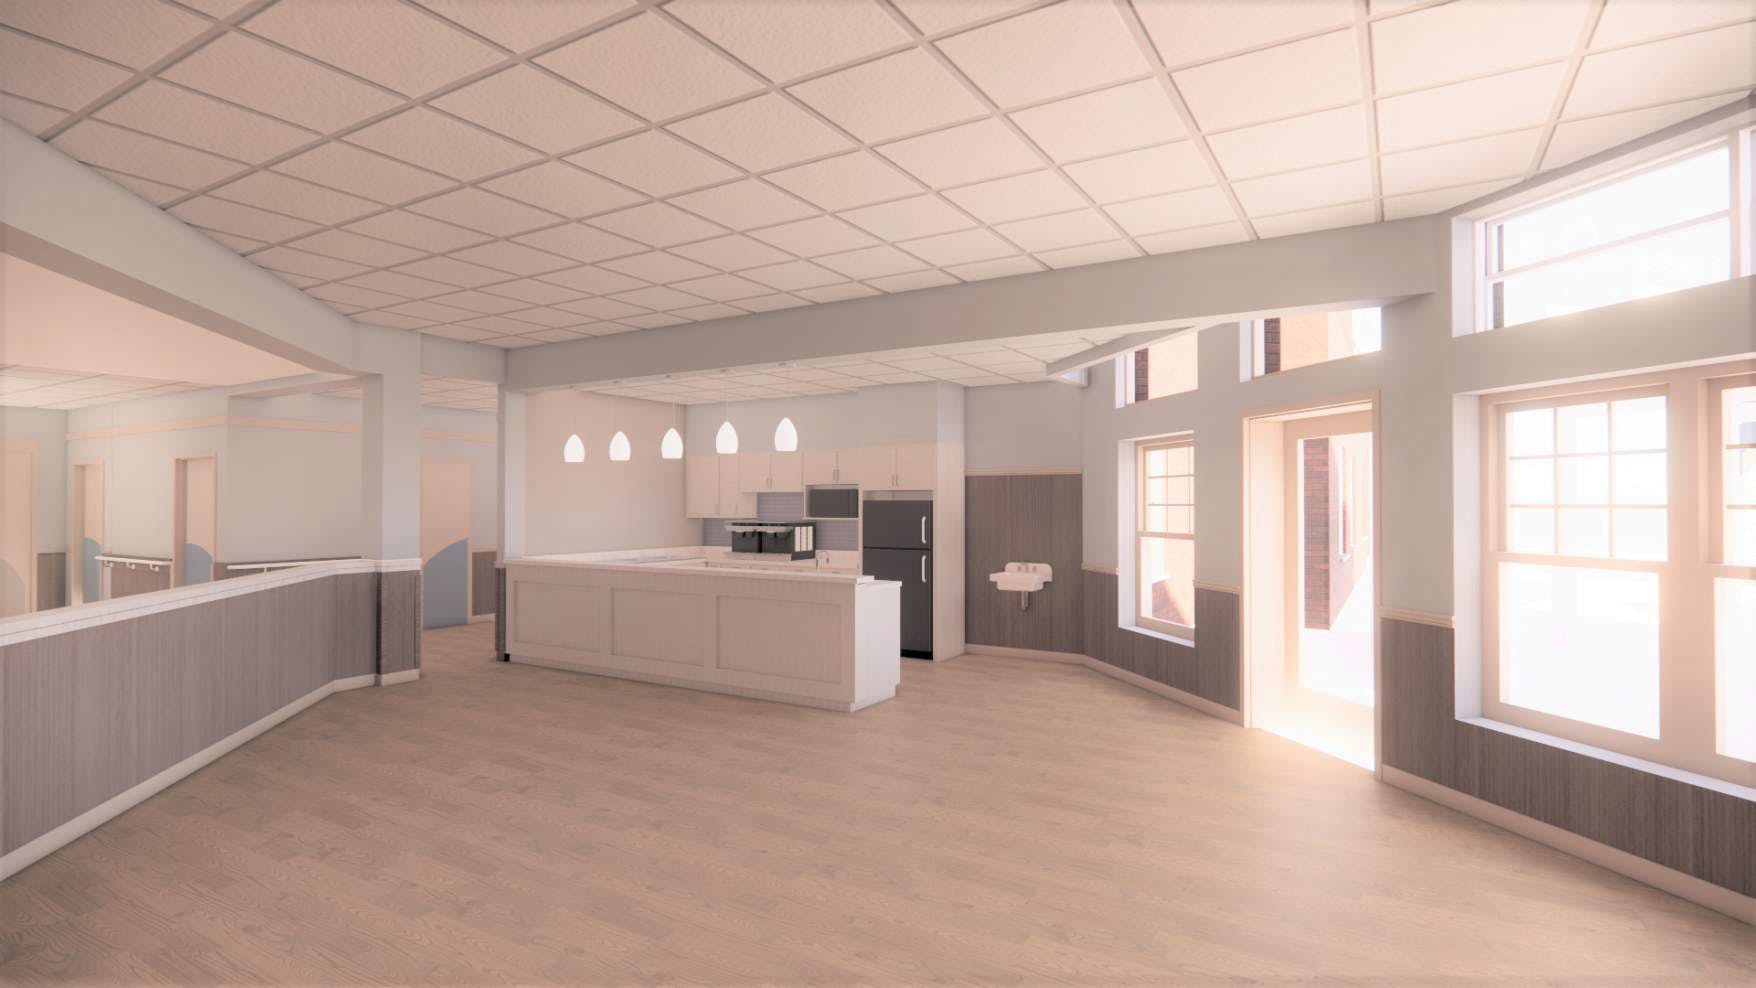 Rendering of the West dining unit